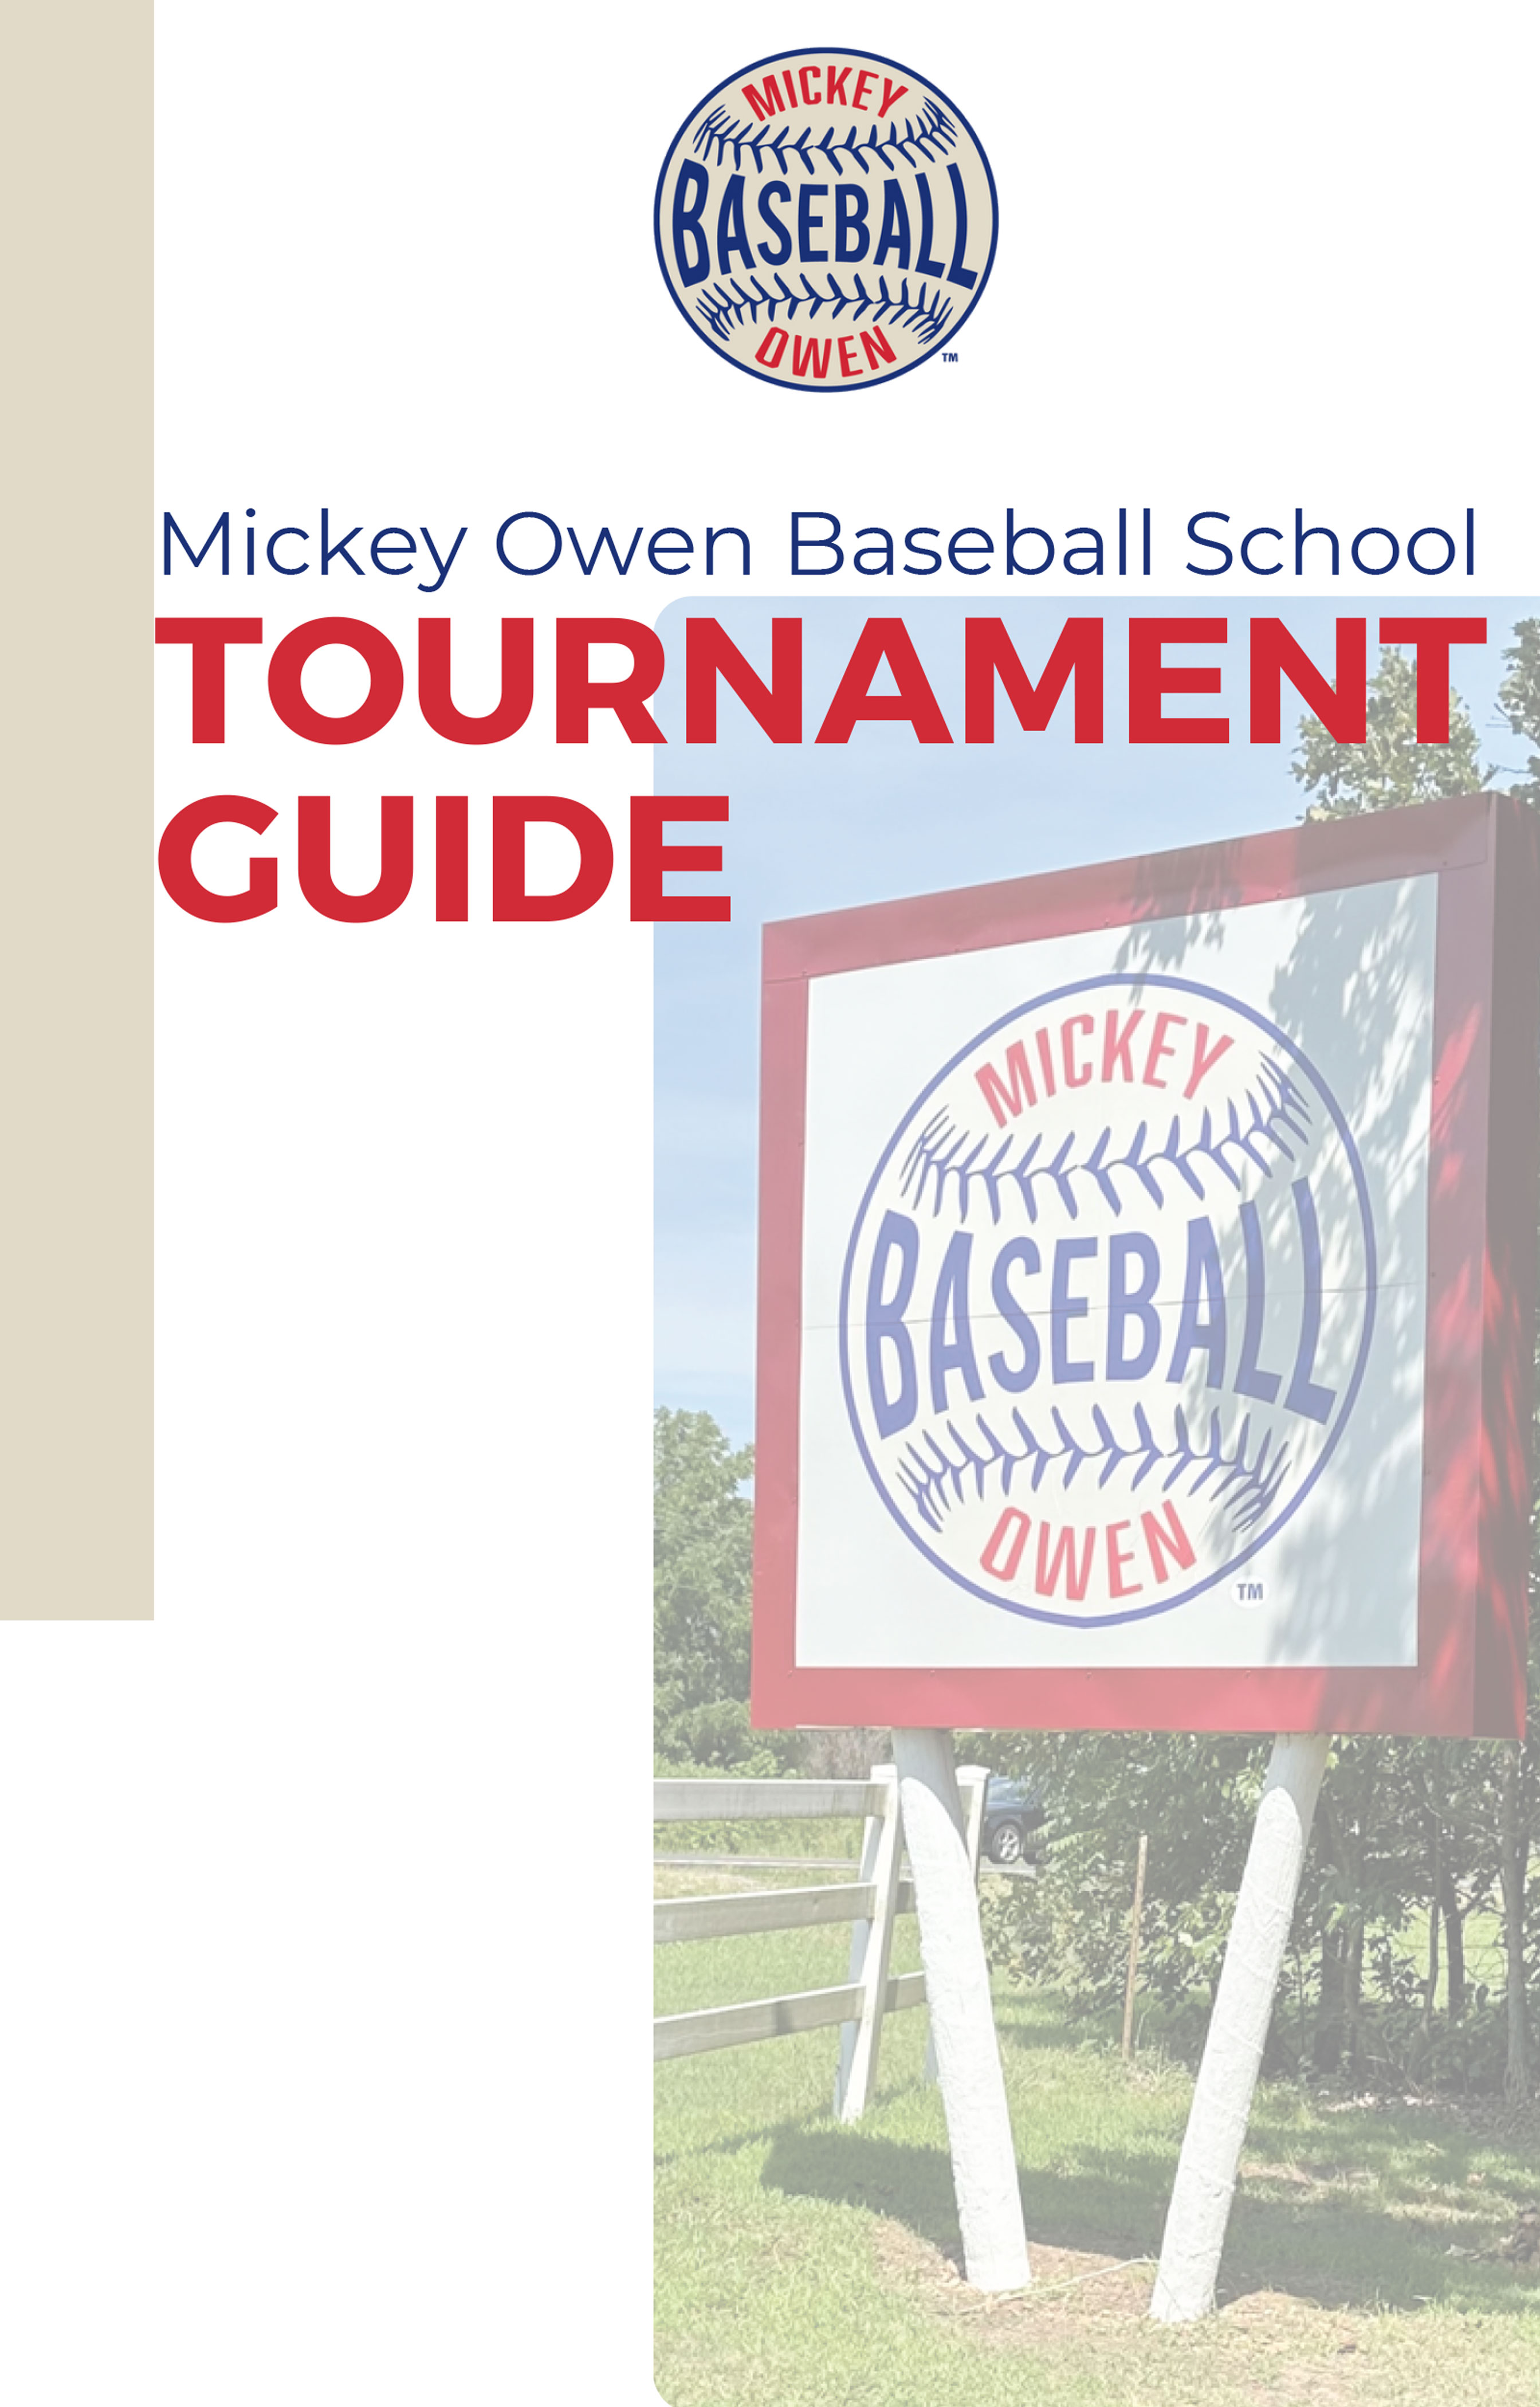 Mickey Owen Tournament Guide page 1.